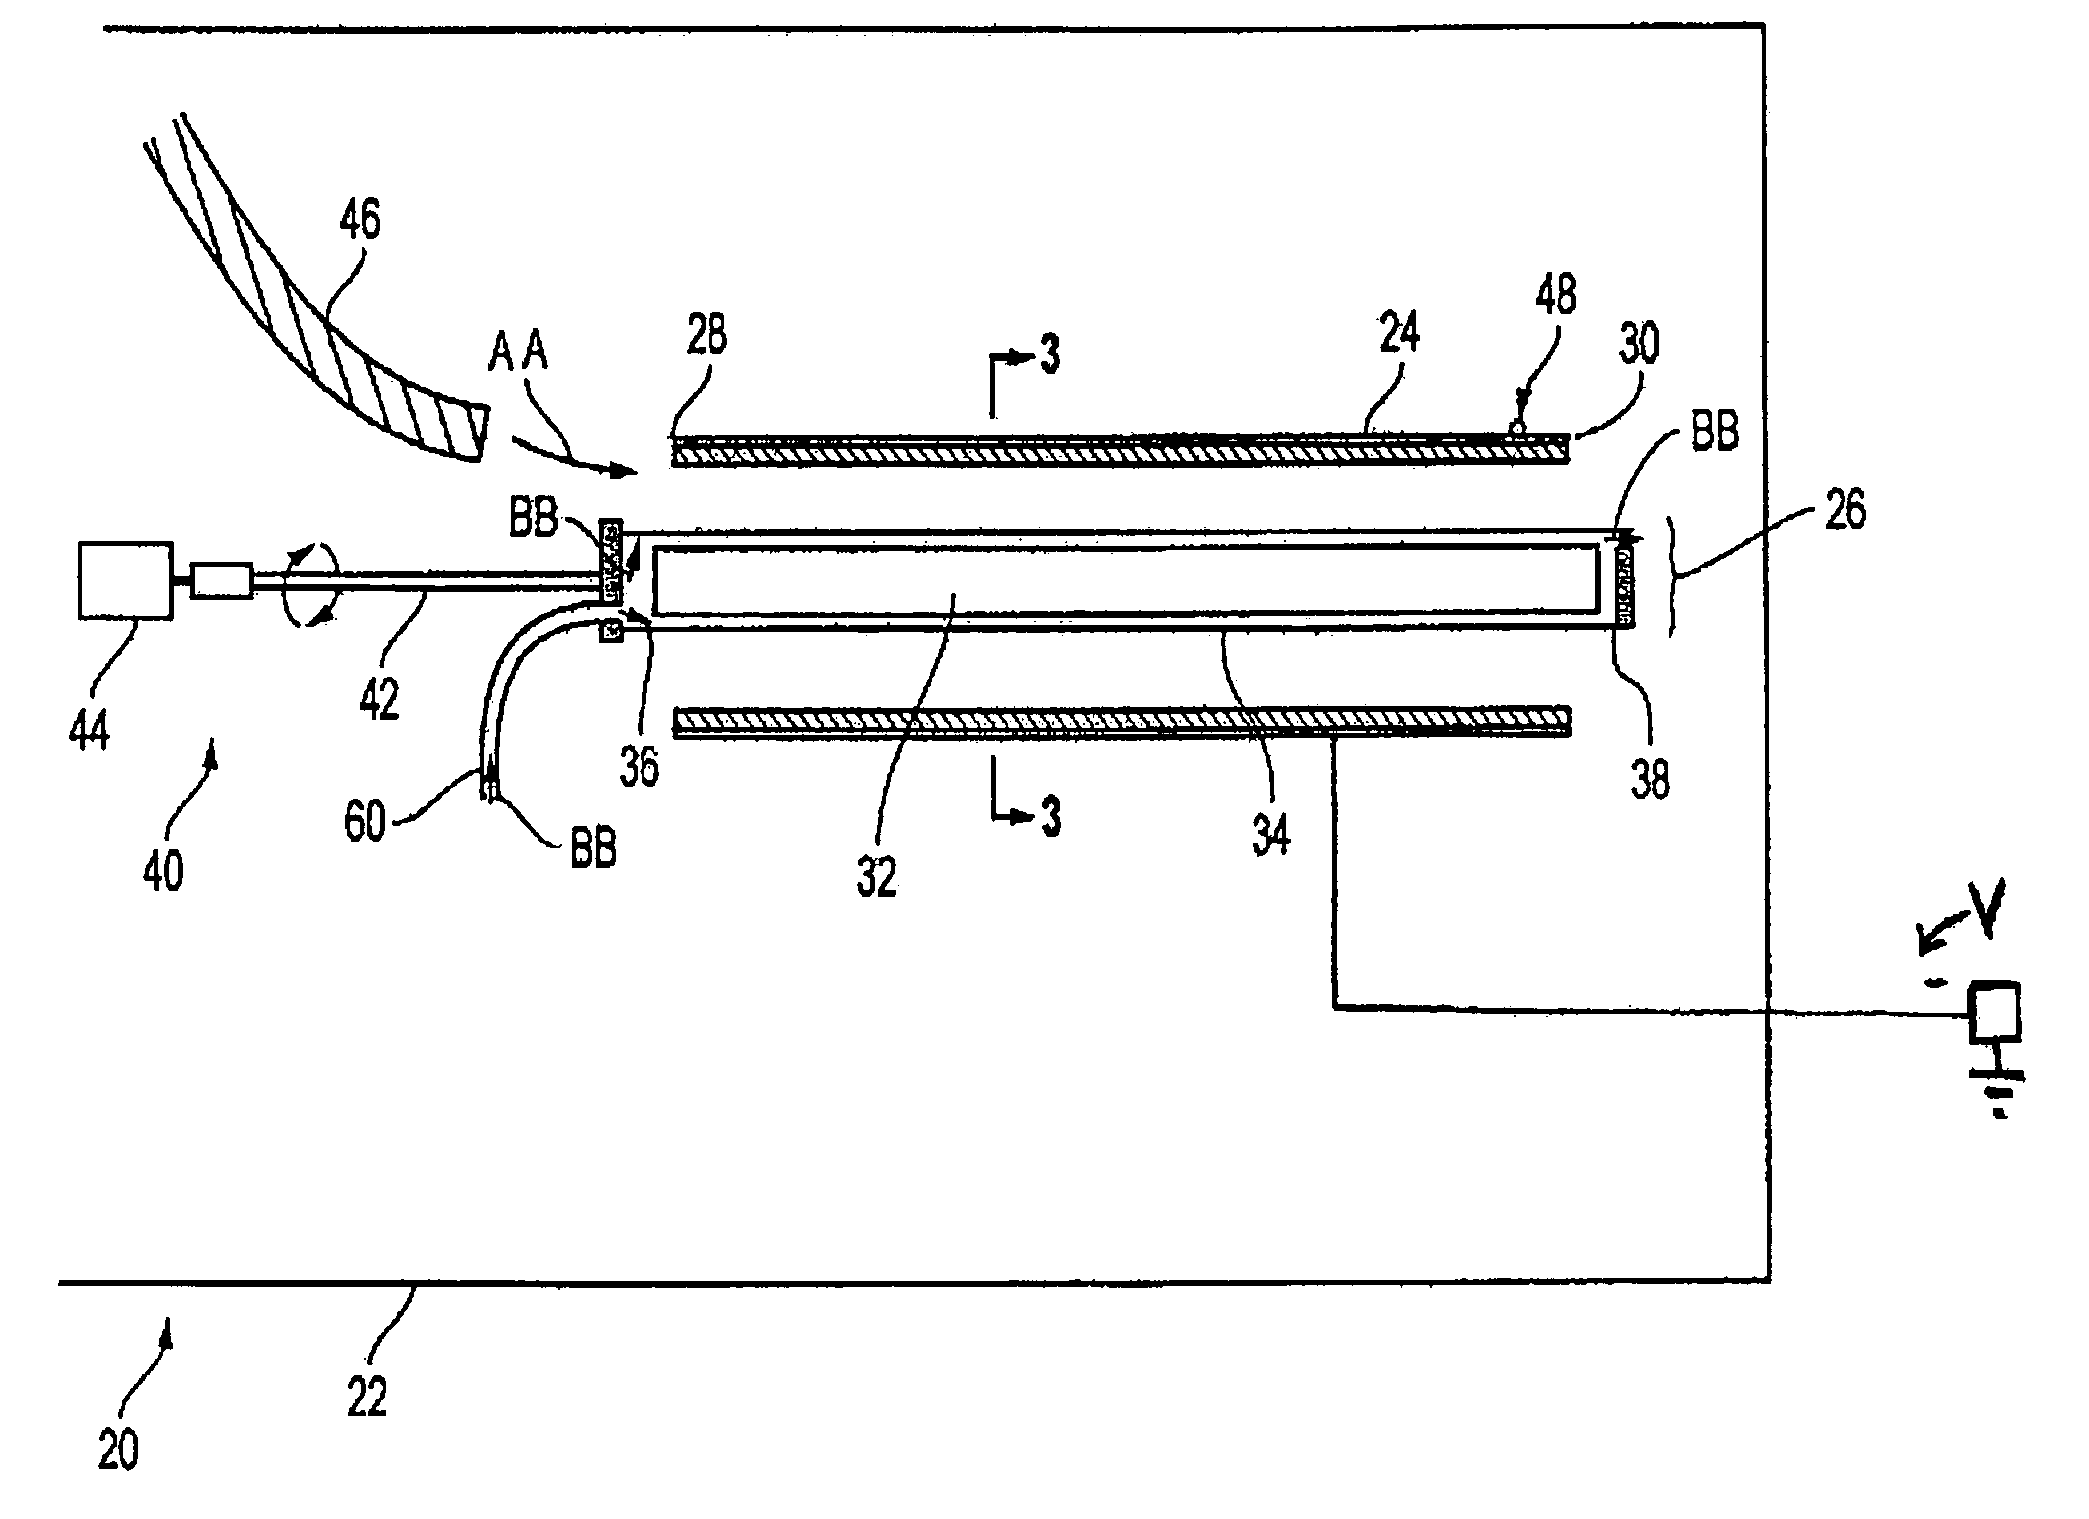 Method for depositing coatings on the interior surfaces of tubular structures